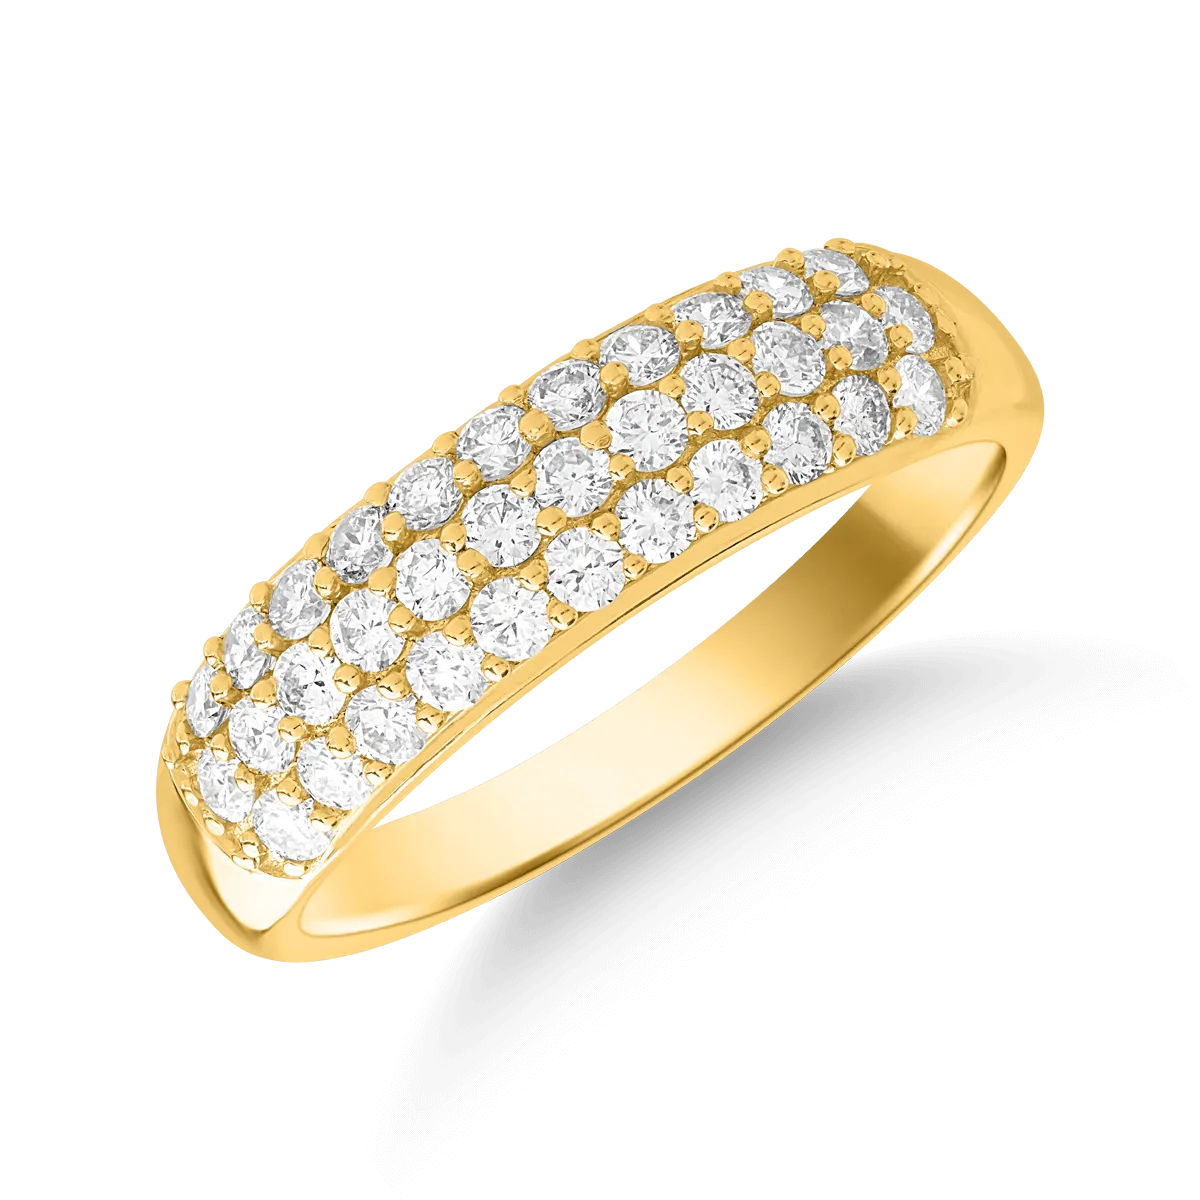 14K yellow gold ring with 0.748ct diamonds